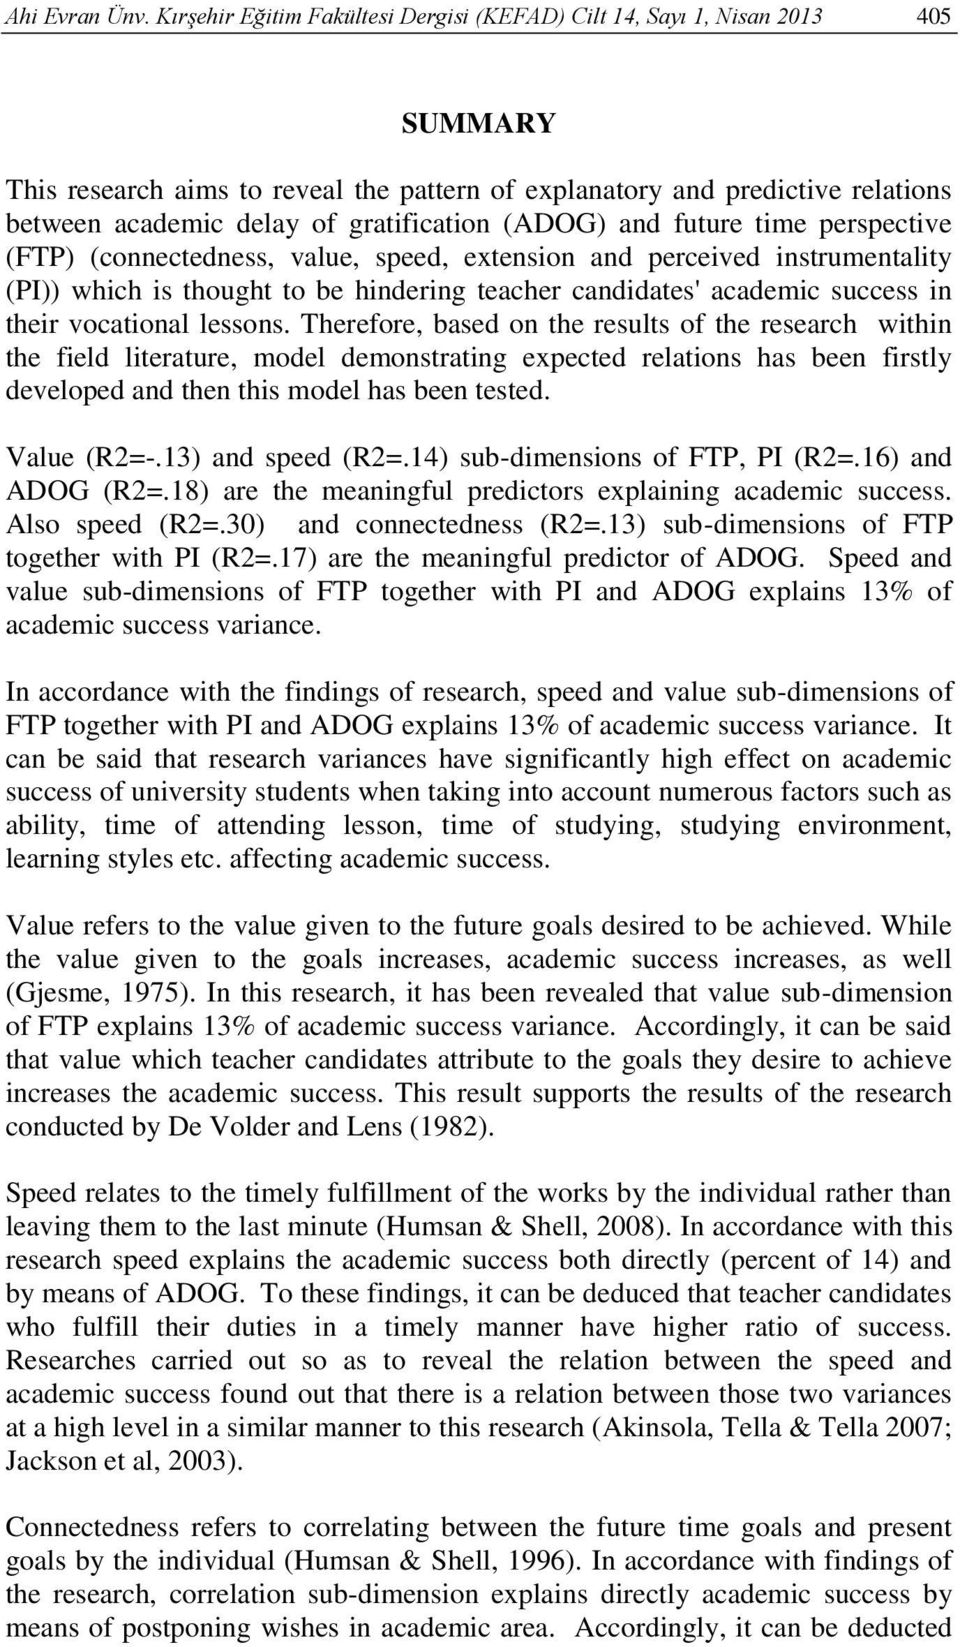 gratification (ADOG) and future time perspective (FTP) (connectedness, value, speed, extension and perceived instrumentality (PI)) which is thought to be hindering teacher candidates' academic